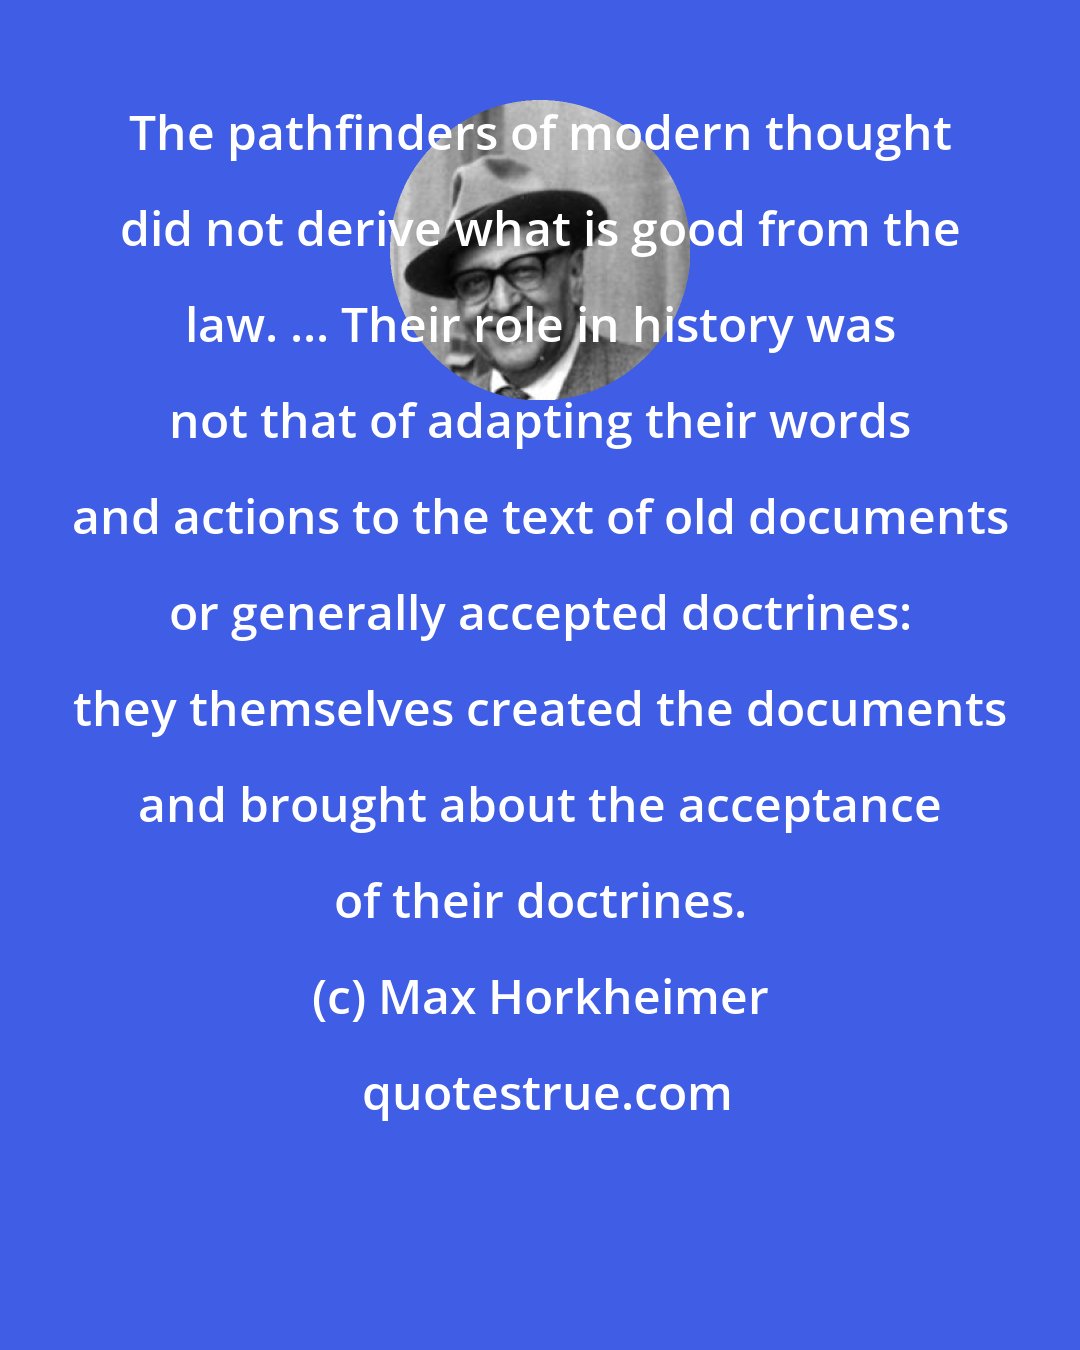 Max Horkheimer: The pathfinders of modern thought did not derive what is good from the law. ... Their role in history was not that of adapting their words and actions to the text of old documents or generally accepted doctrines: they themselves created the documents and brought about the acceptance of their doctrines.